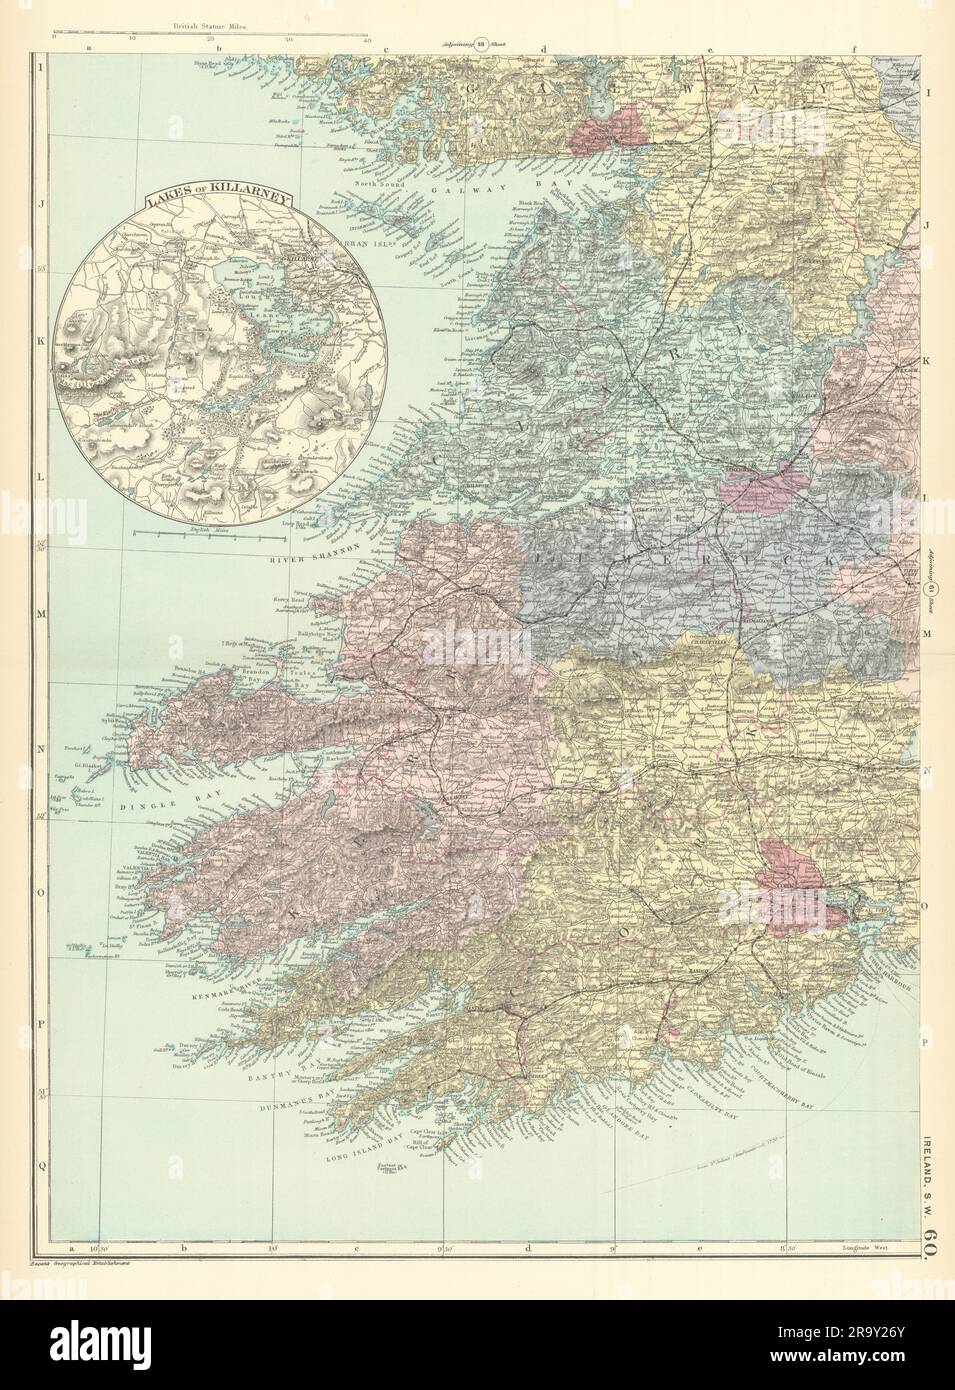 IRELAND (South West) Munster Cork Kerry Clare Limerick GW BACON 1891 old map Stock Photo